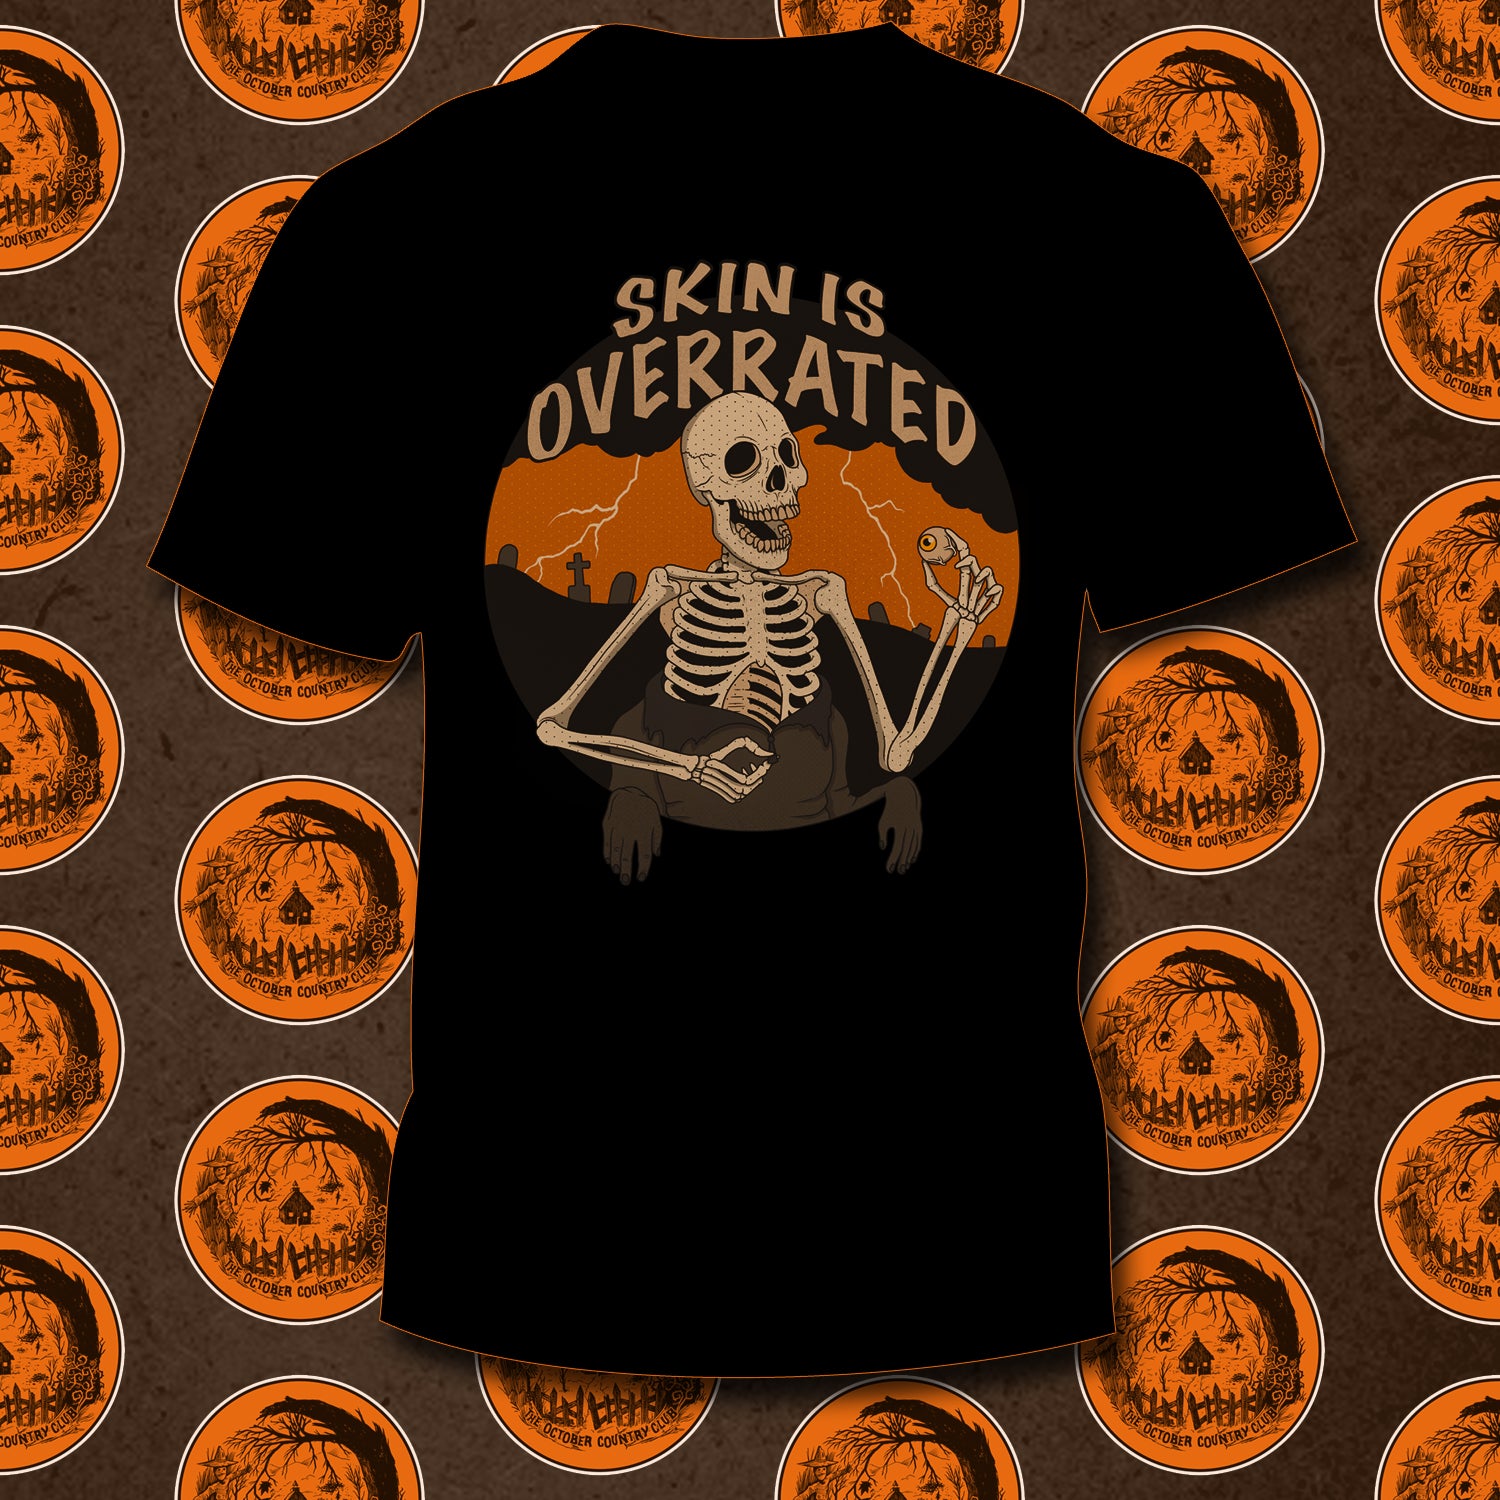 SKIN IS OVERRATED T-SHIRT